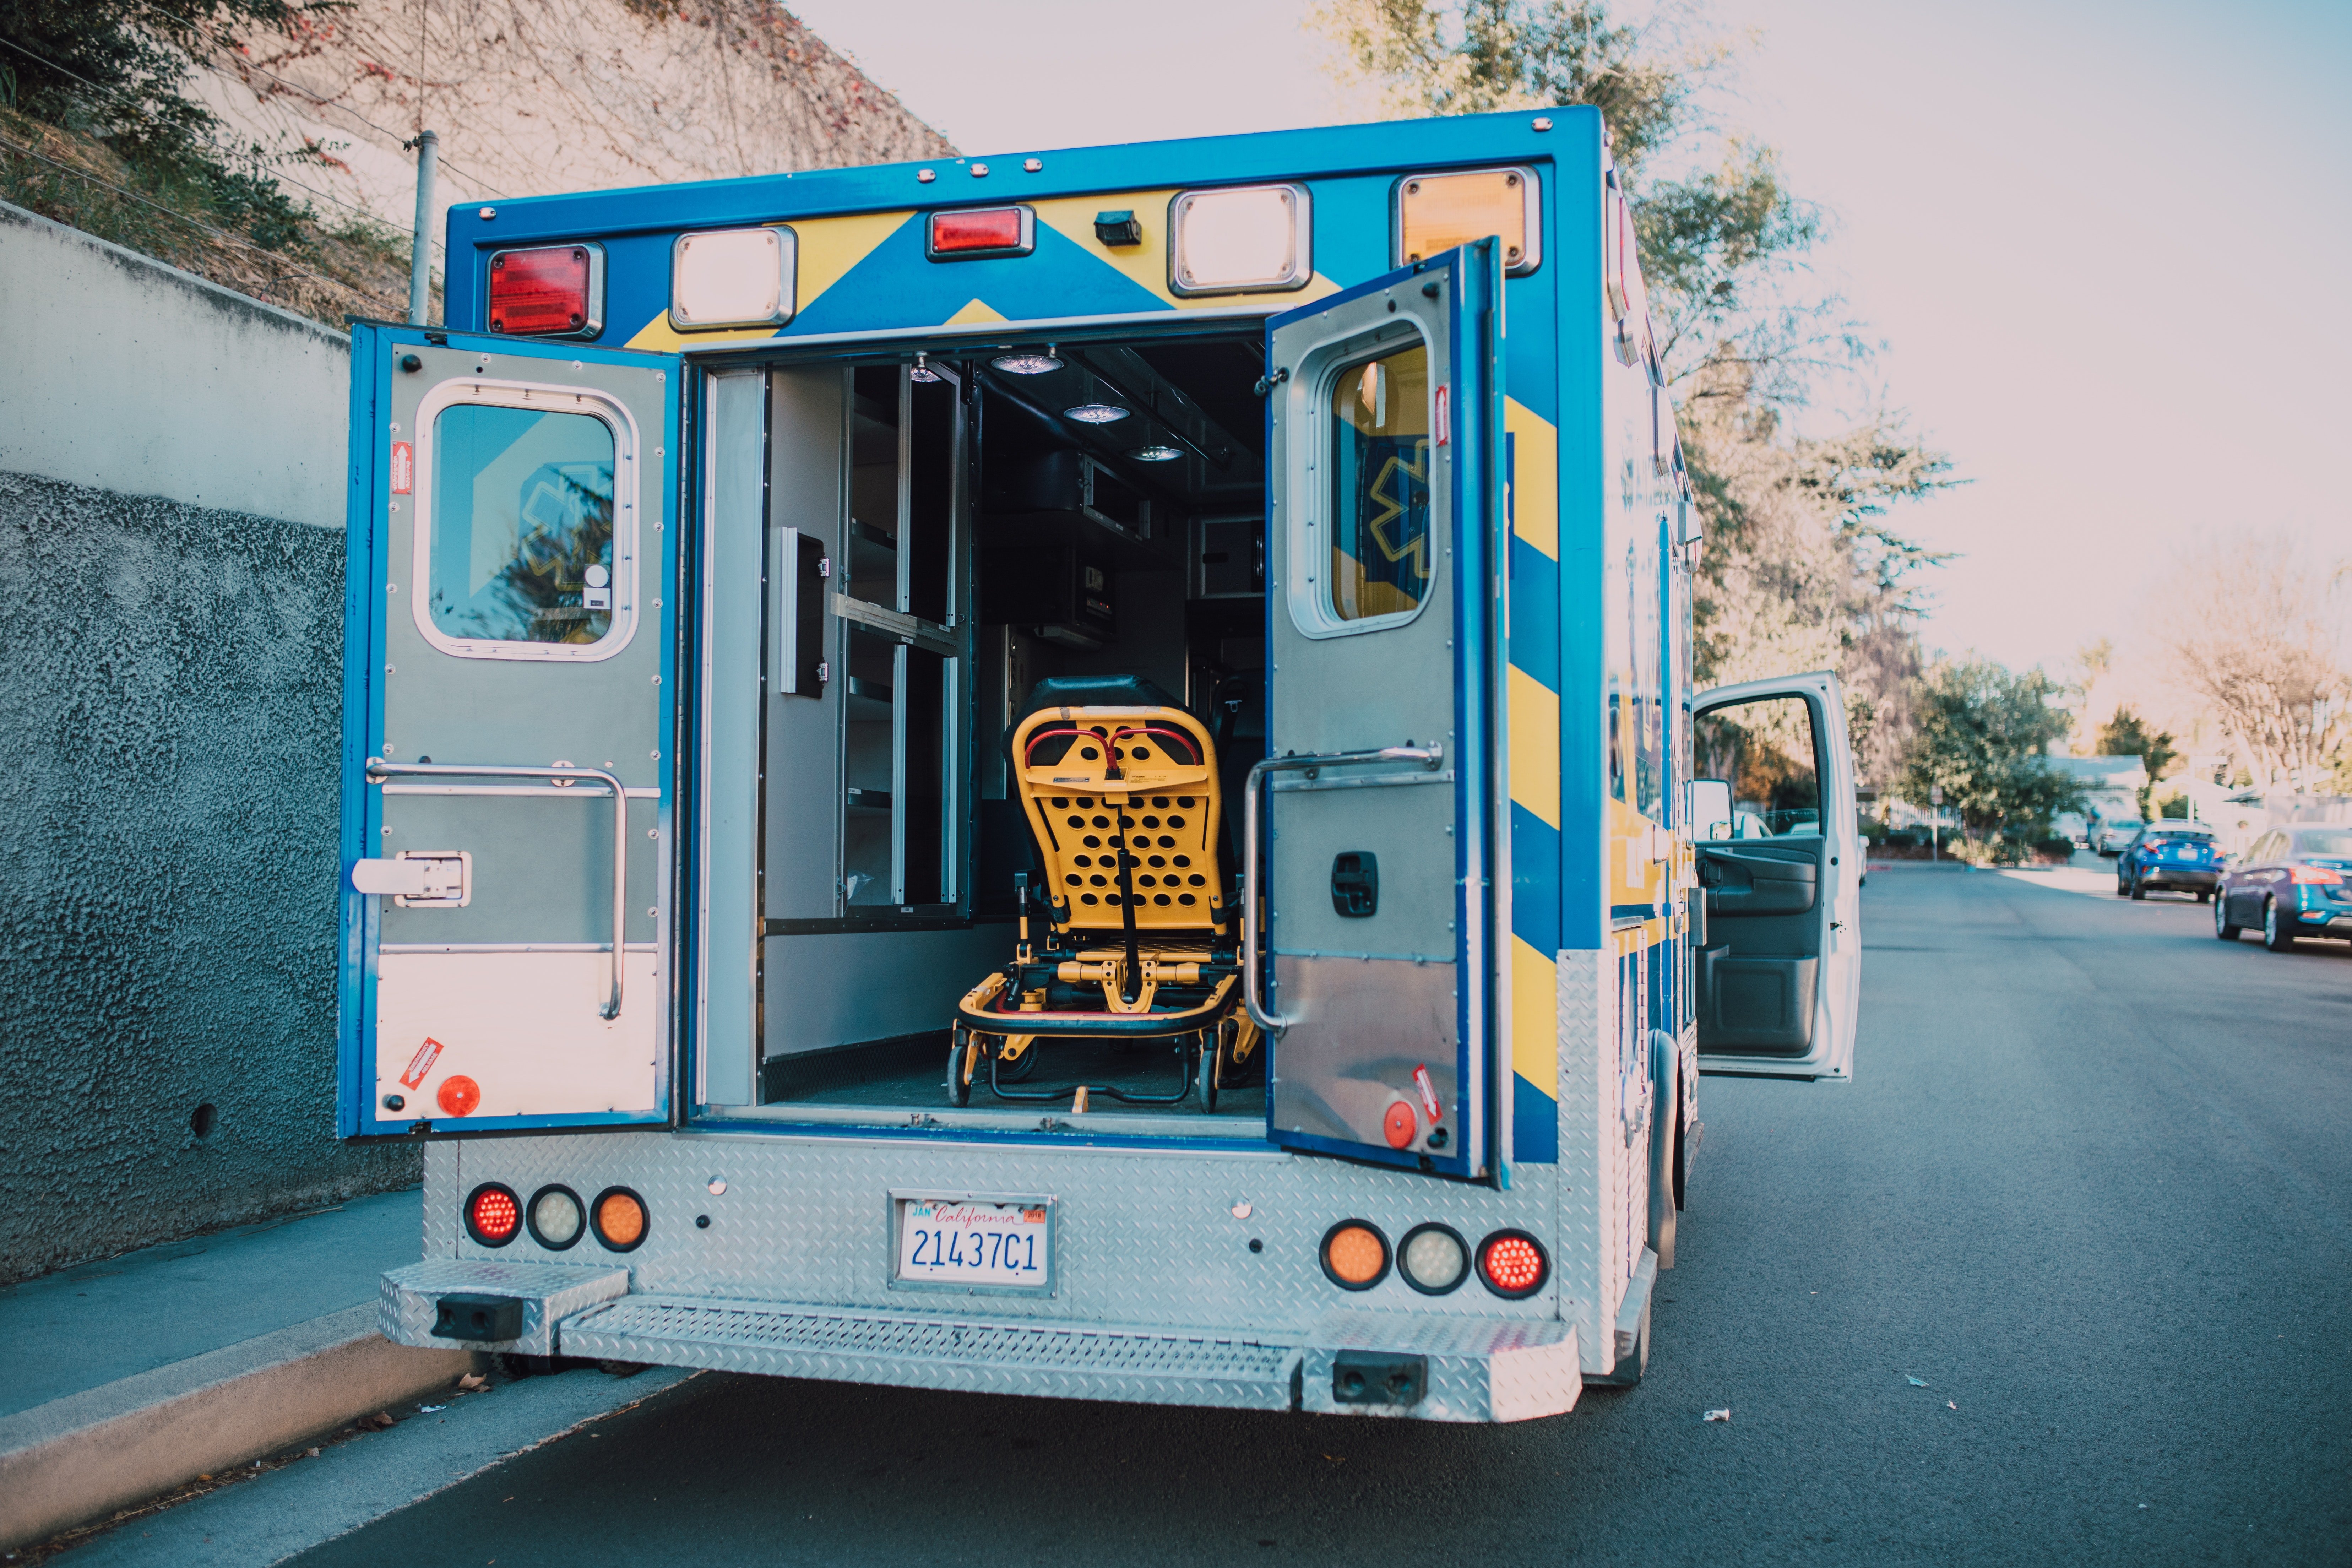 An ambulance with its back doors open. | Pexels